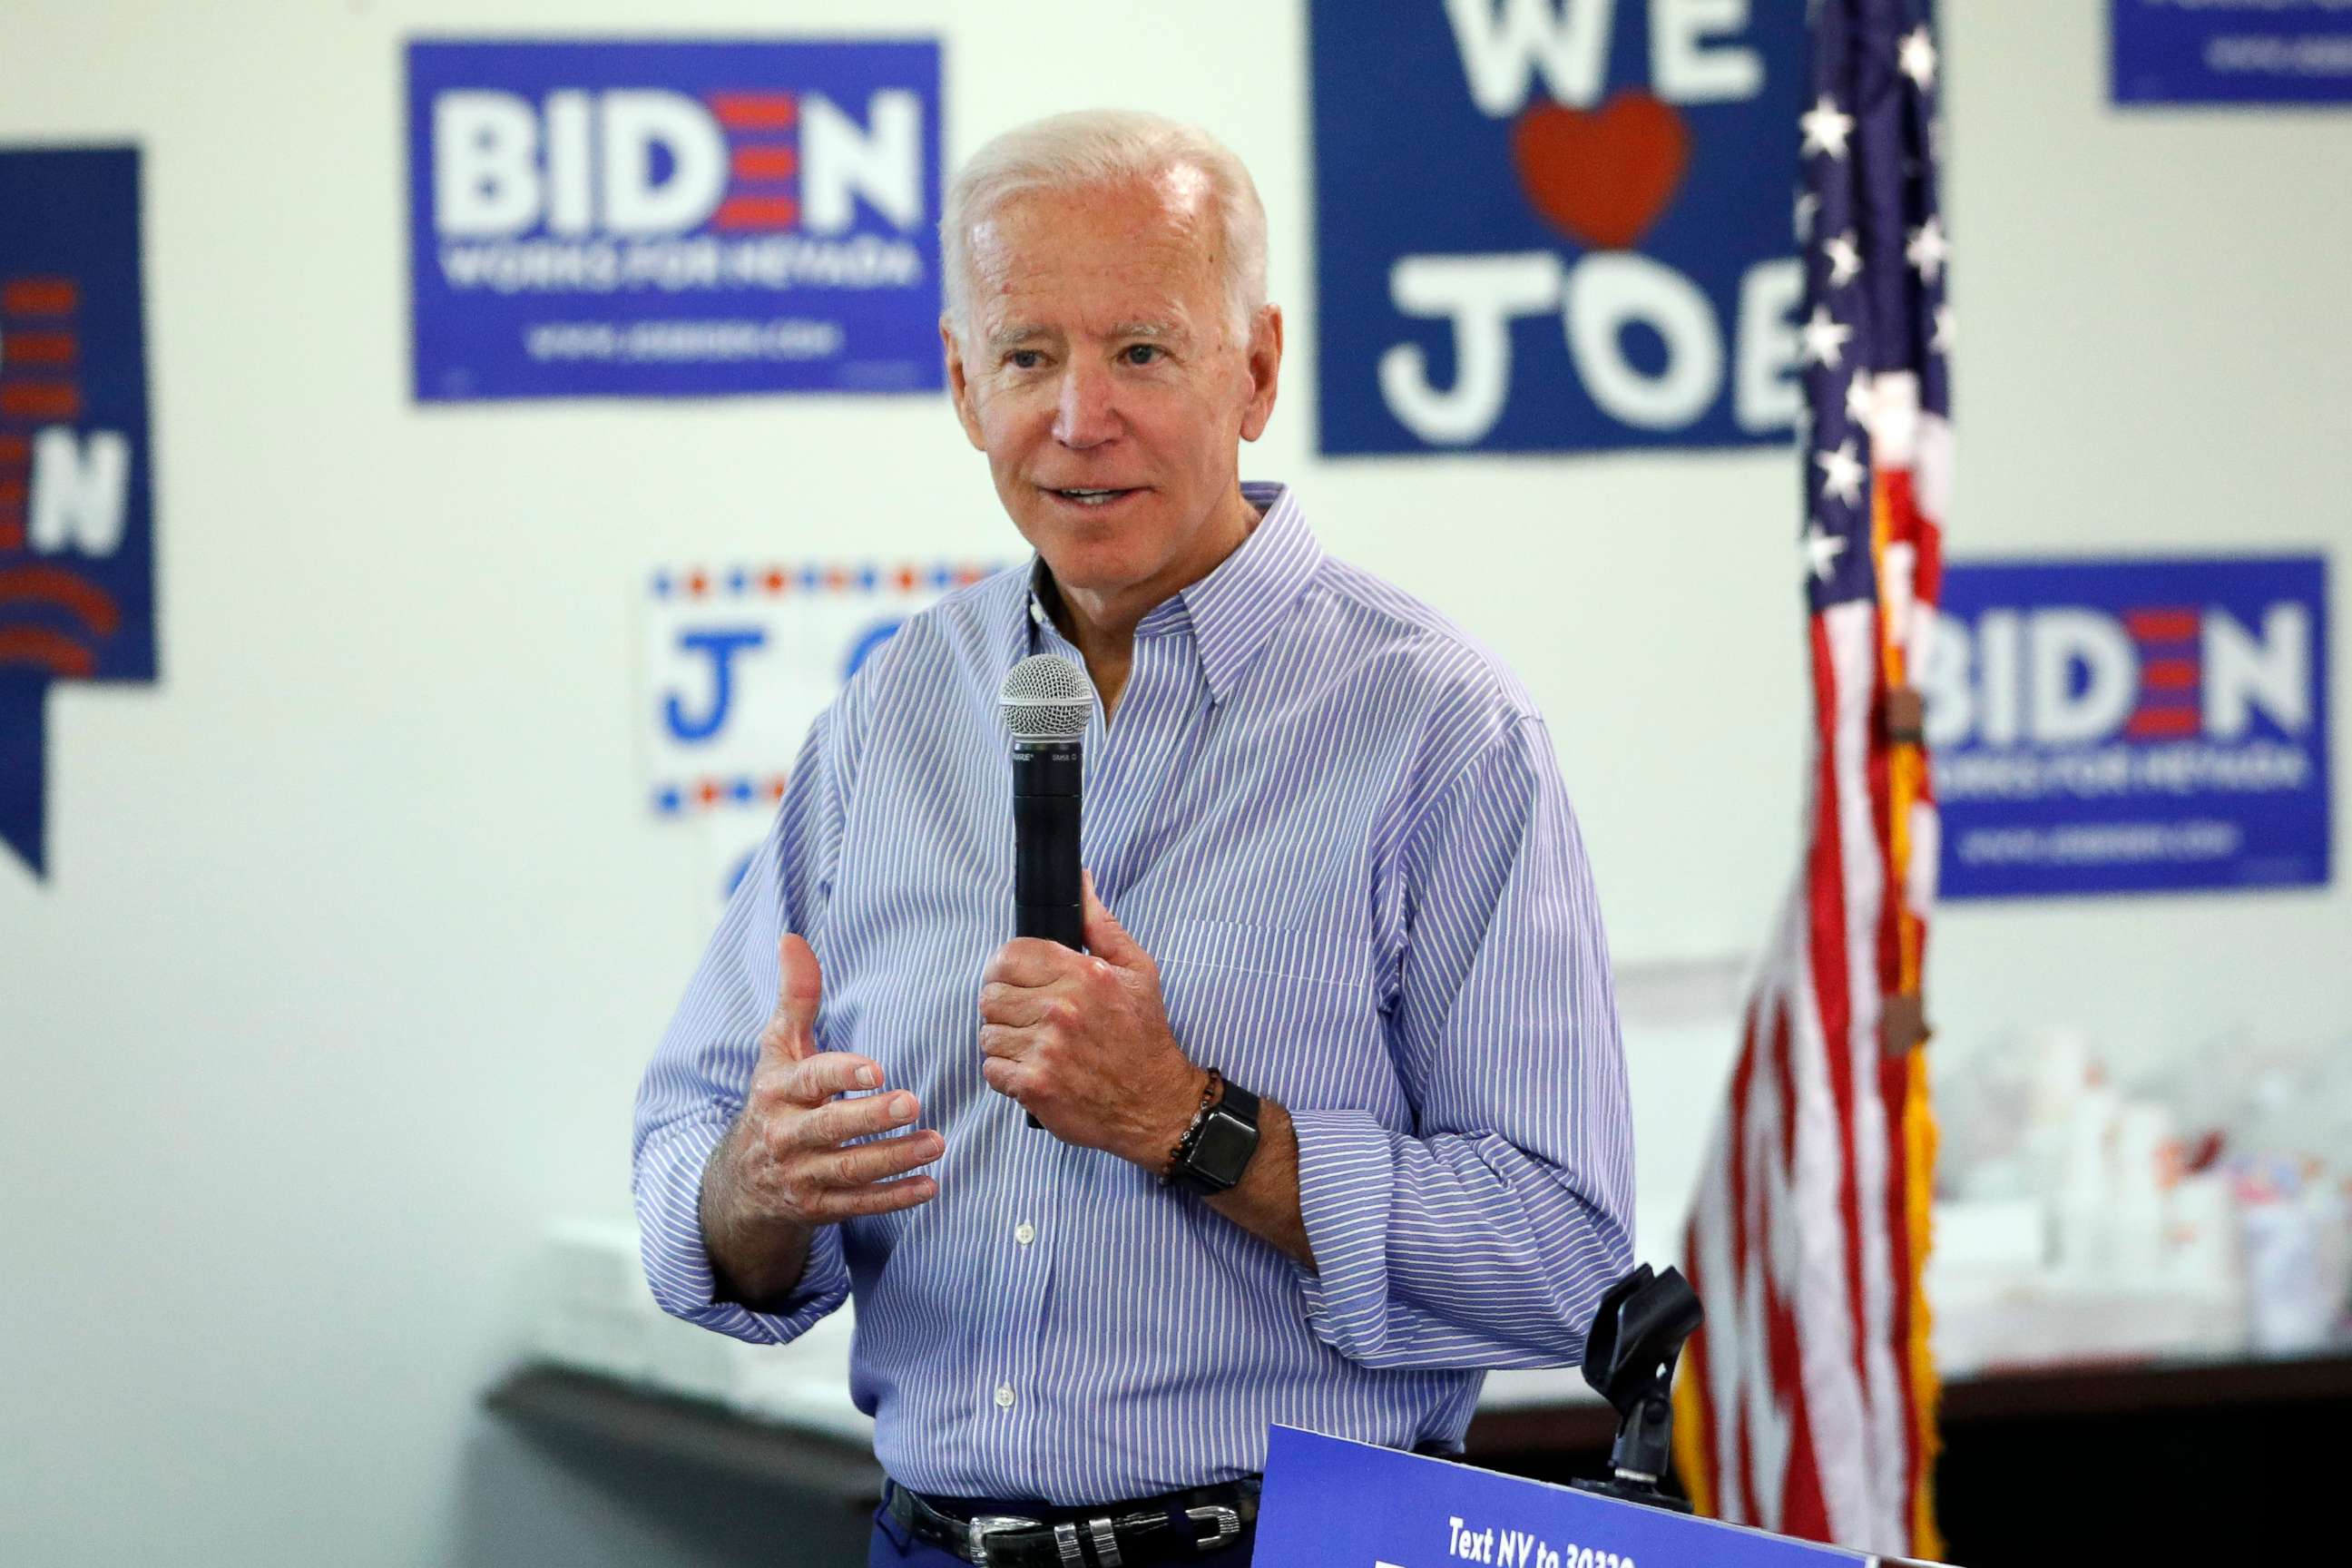 PHOTO: In this July 20, 2019, photo, former Vice President and Democratic presidential candidate Joe Biden speaks at a campaign event in an electrical workers union hall in Las Vegas.